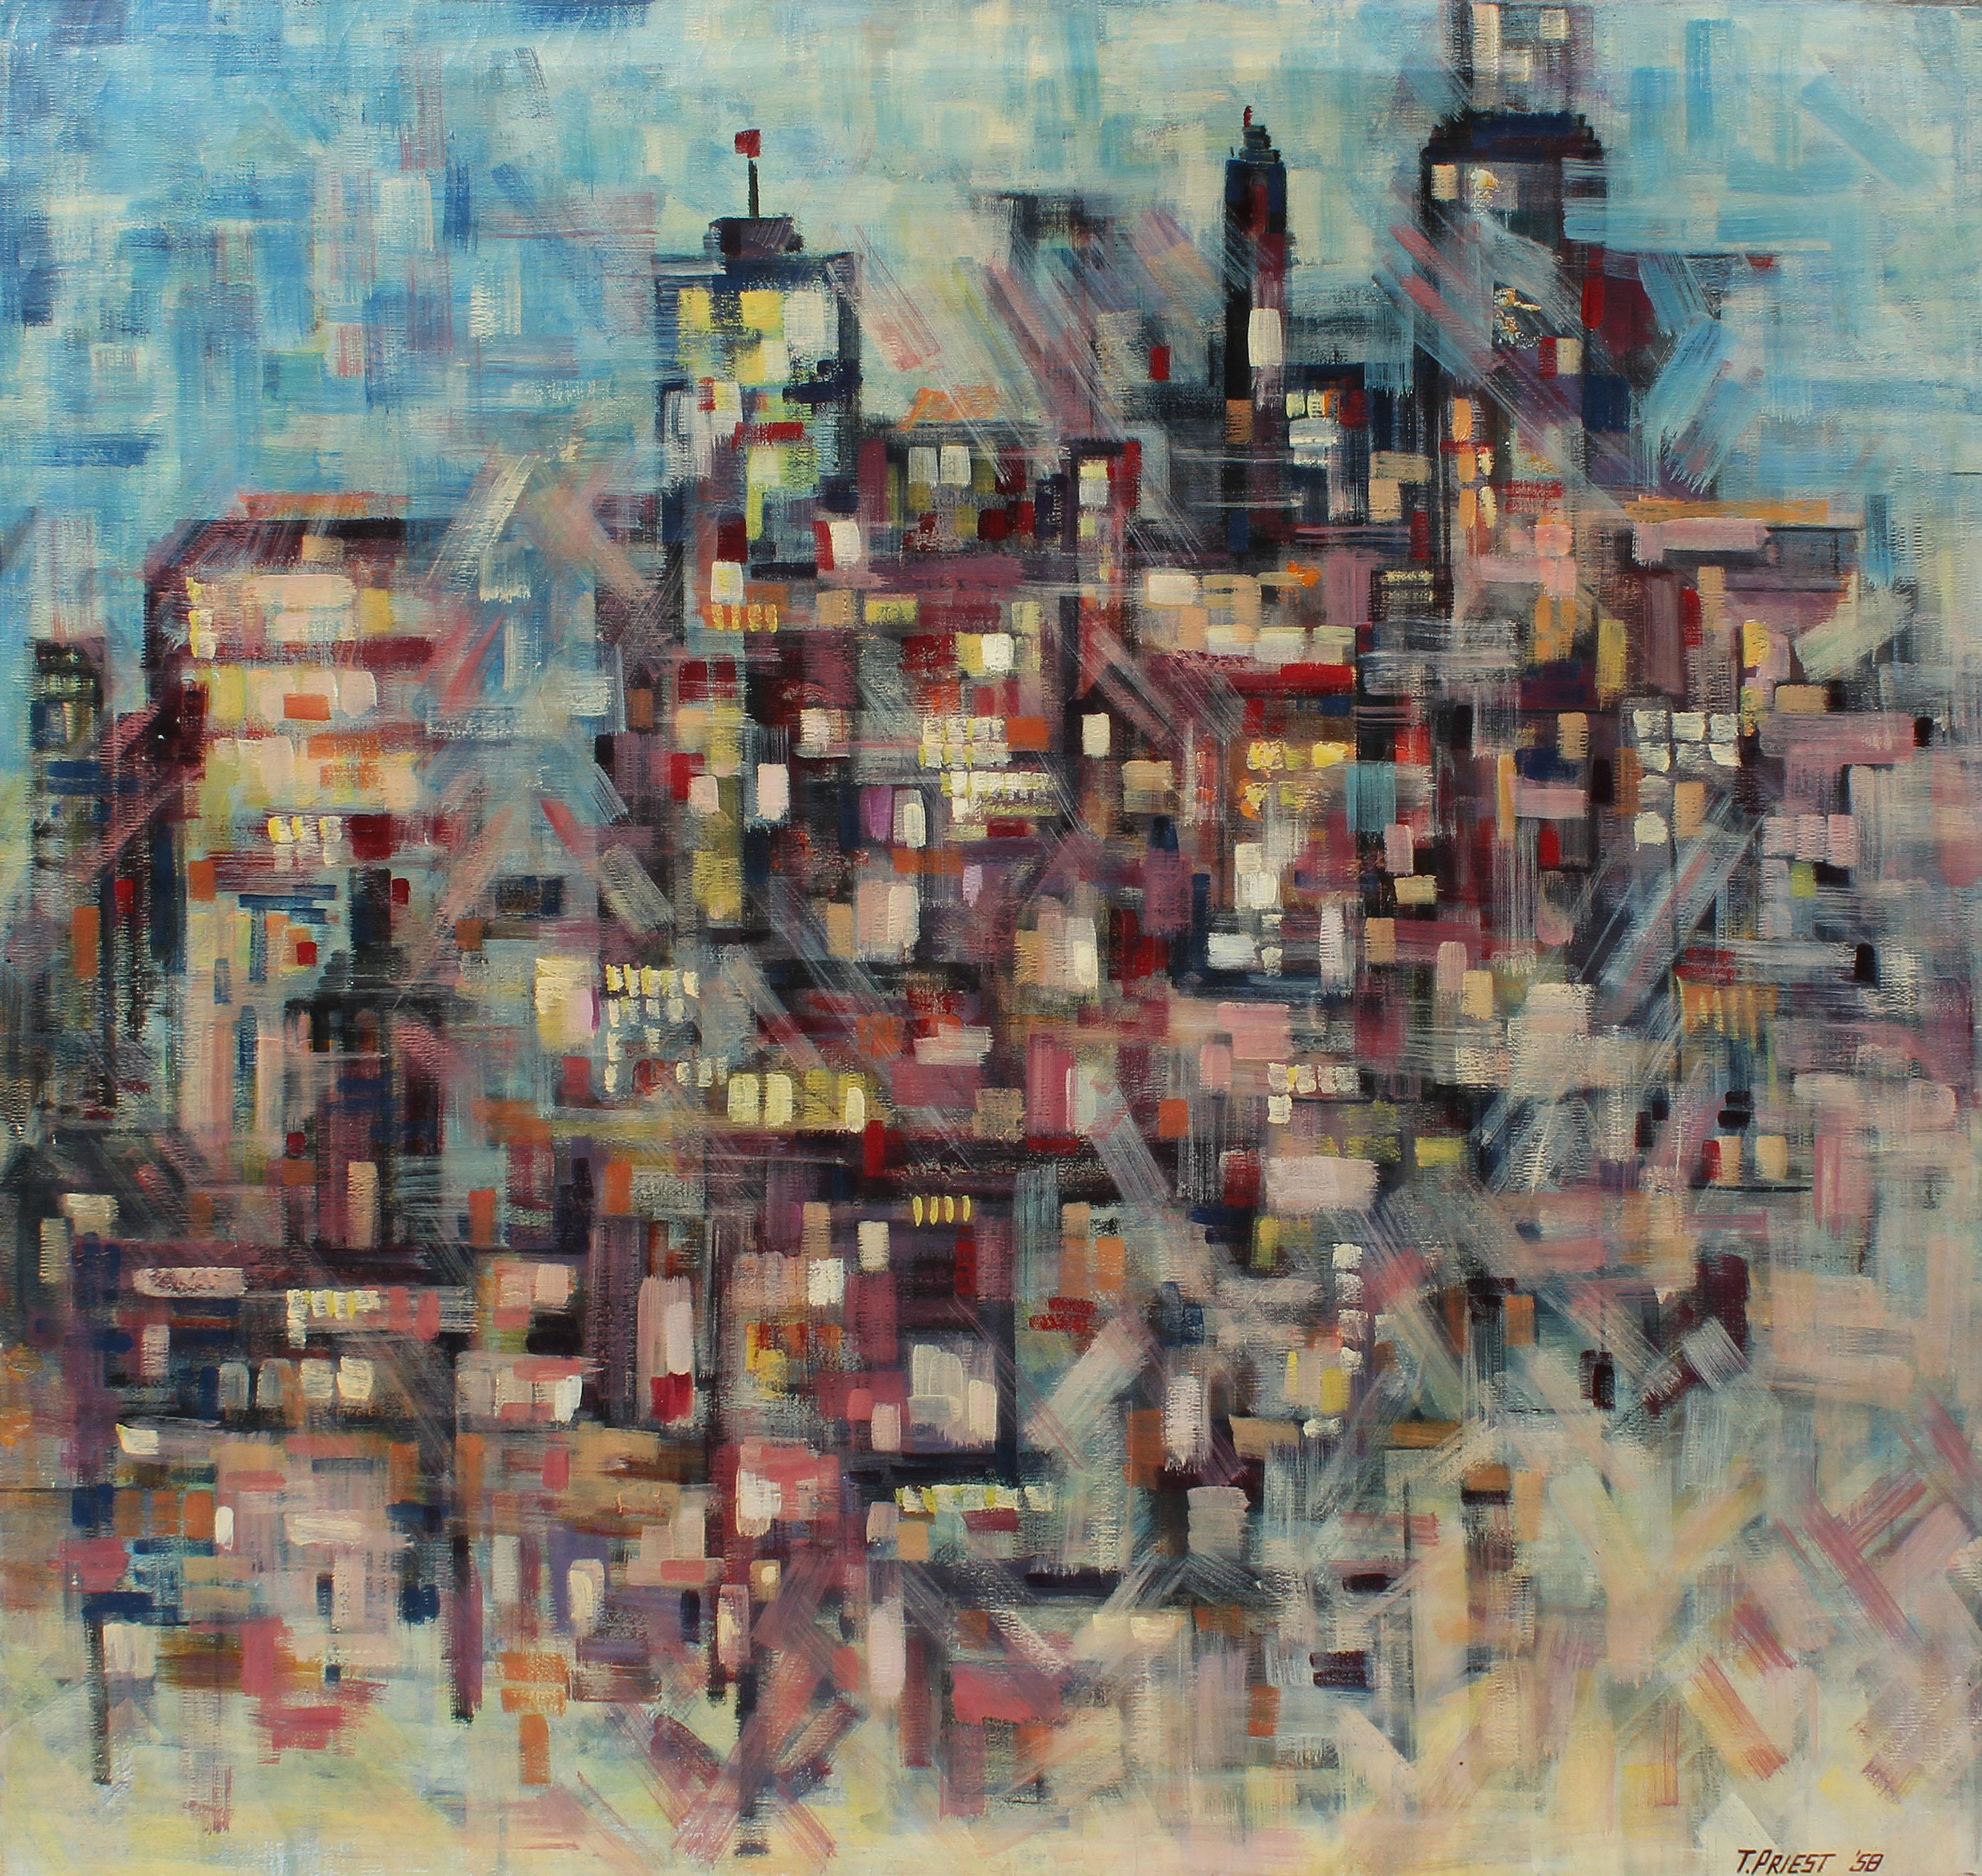 Modernist abstract cityscape painting by Terri Priest  (1928 - 2014).  Oil on canvas, circa 1958.  Signed lower right.  Displayed in a modernist frame.  Image size, 35